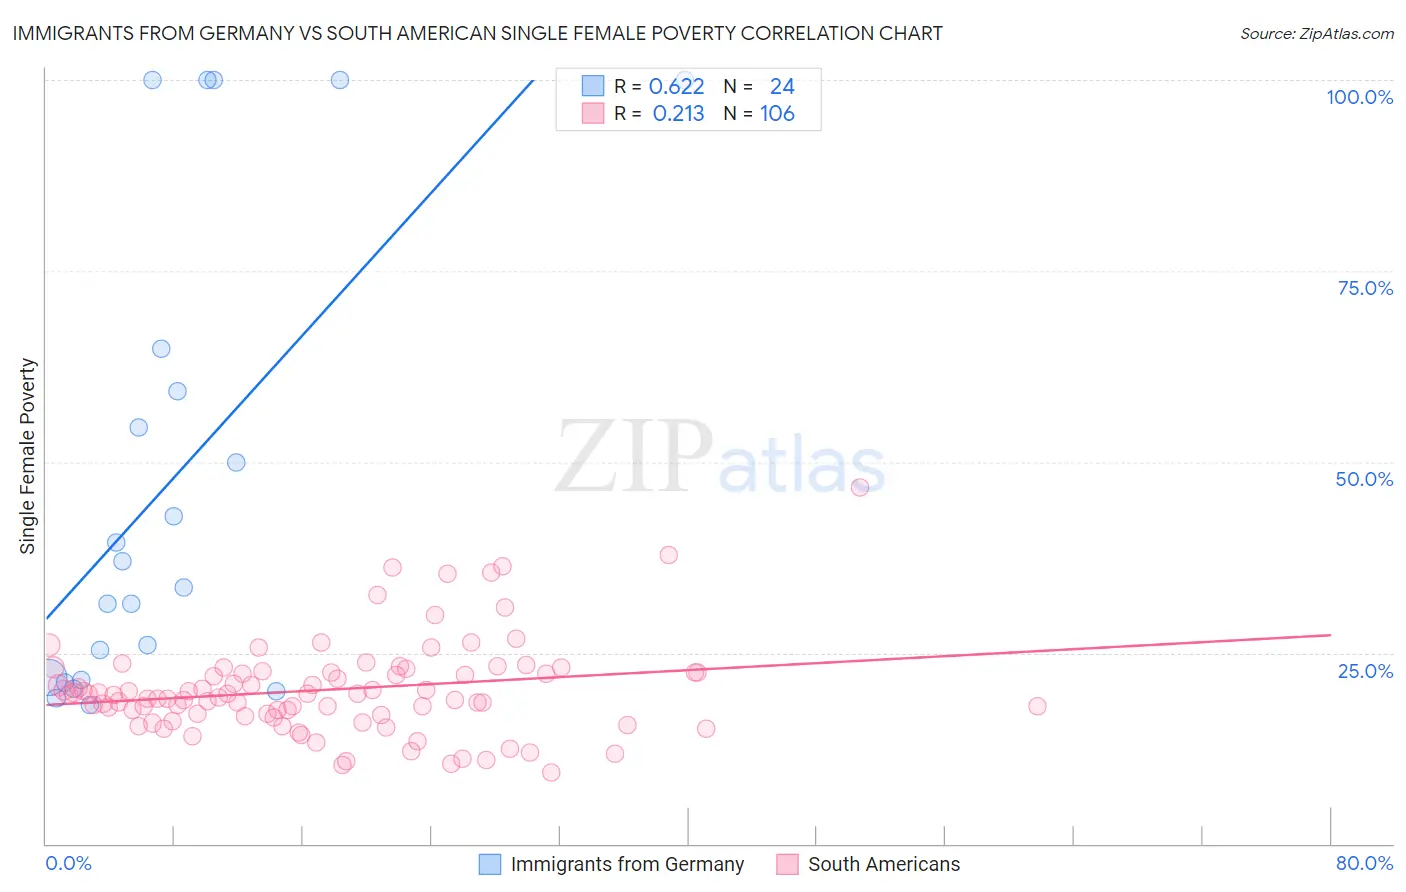 Immigrants from Germany vs South American Single Female Poverty